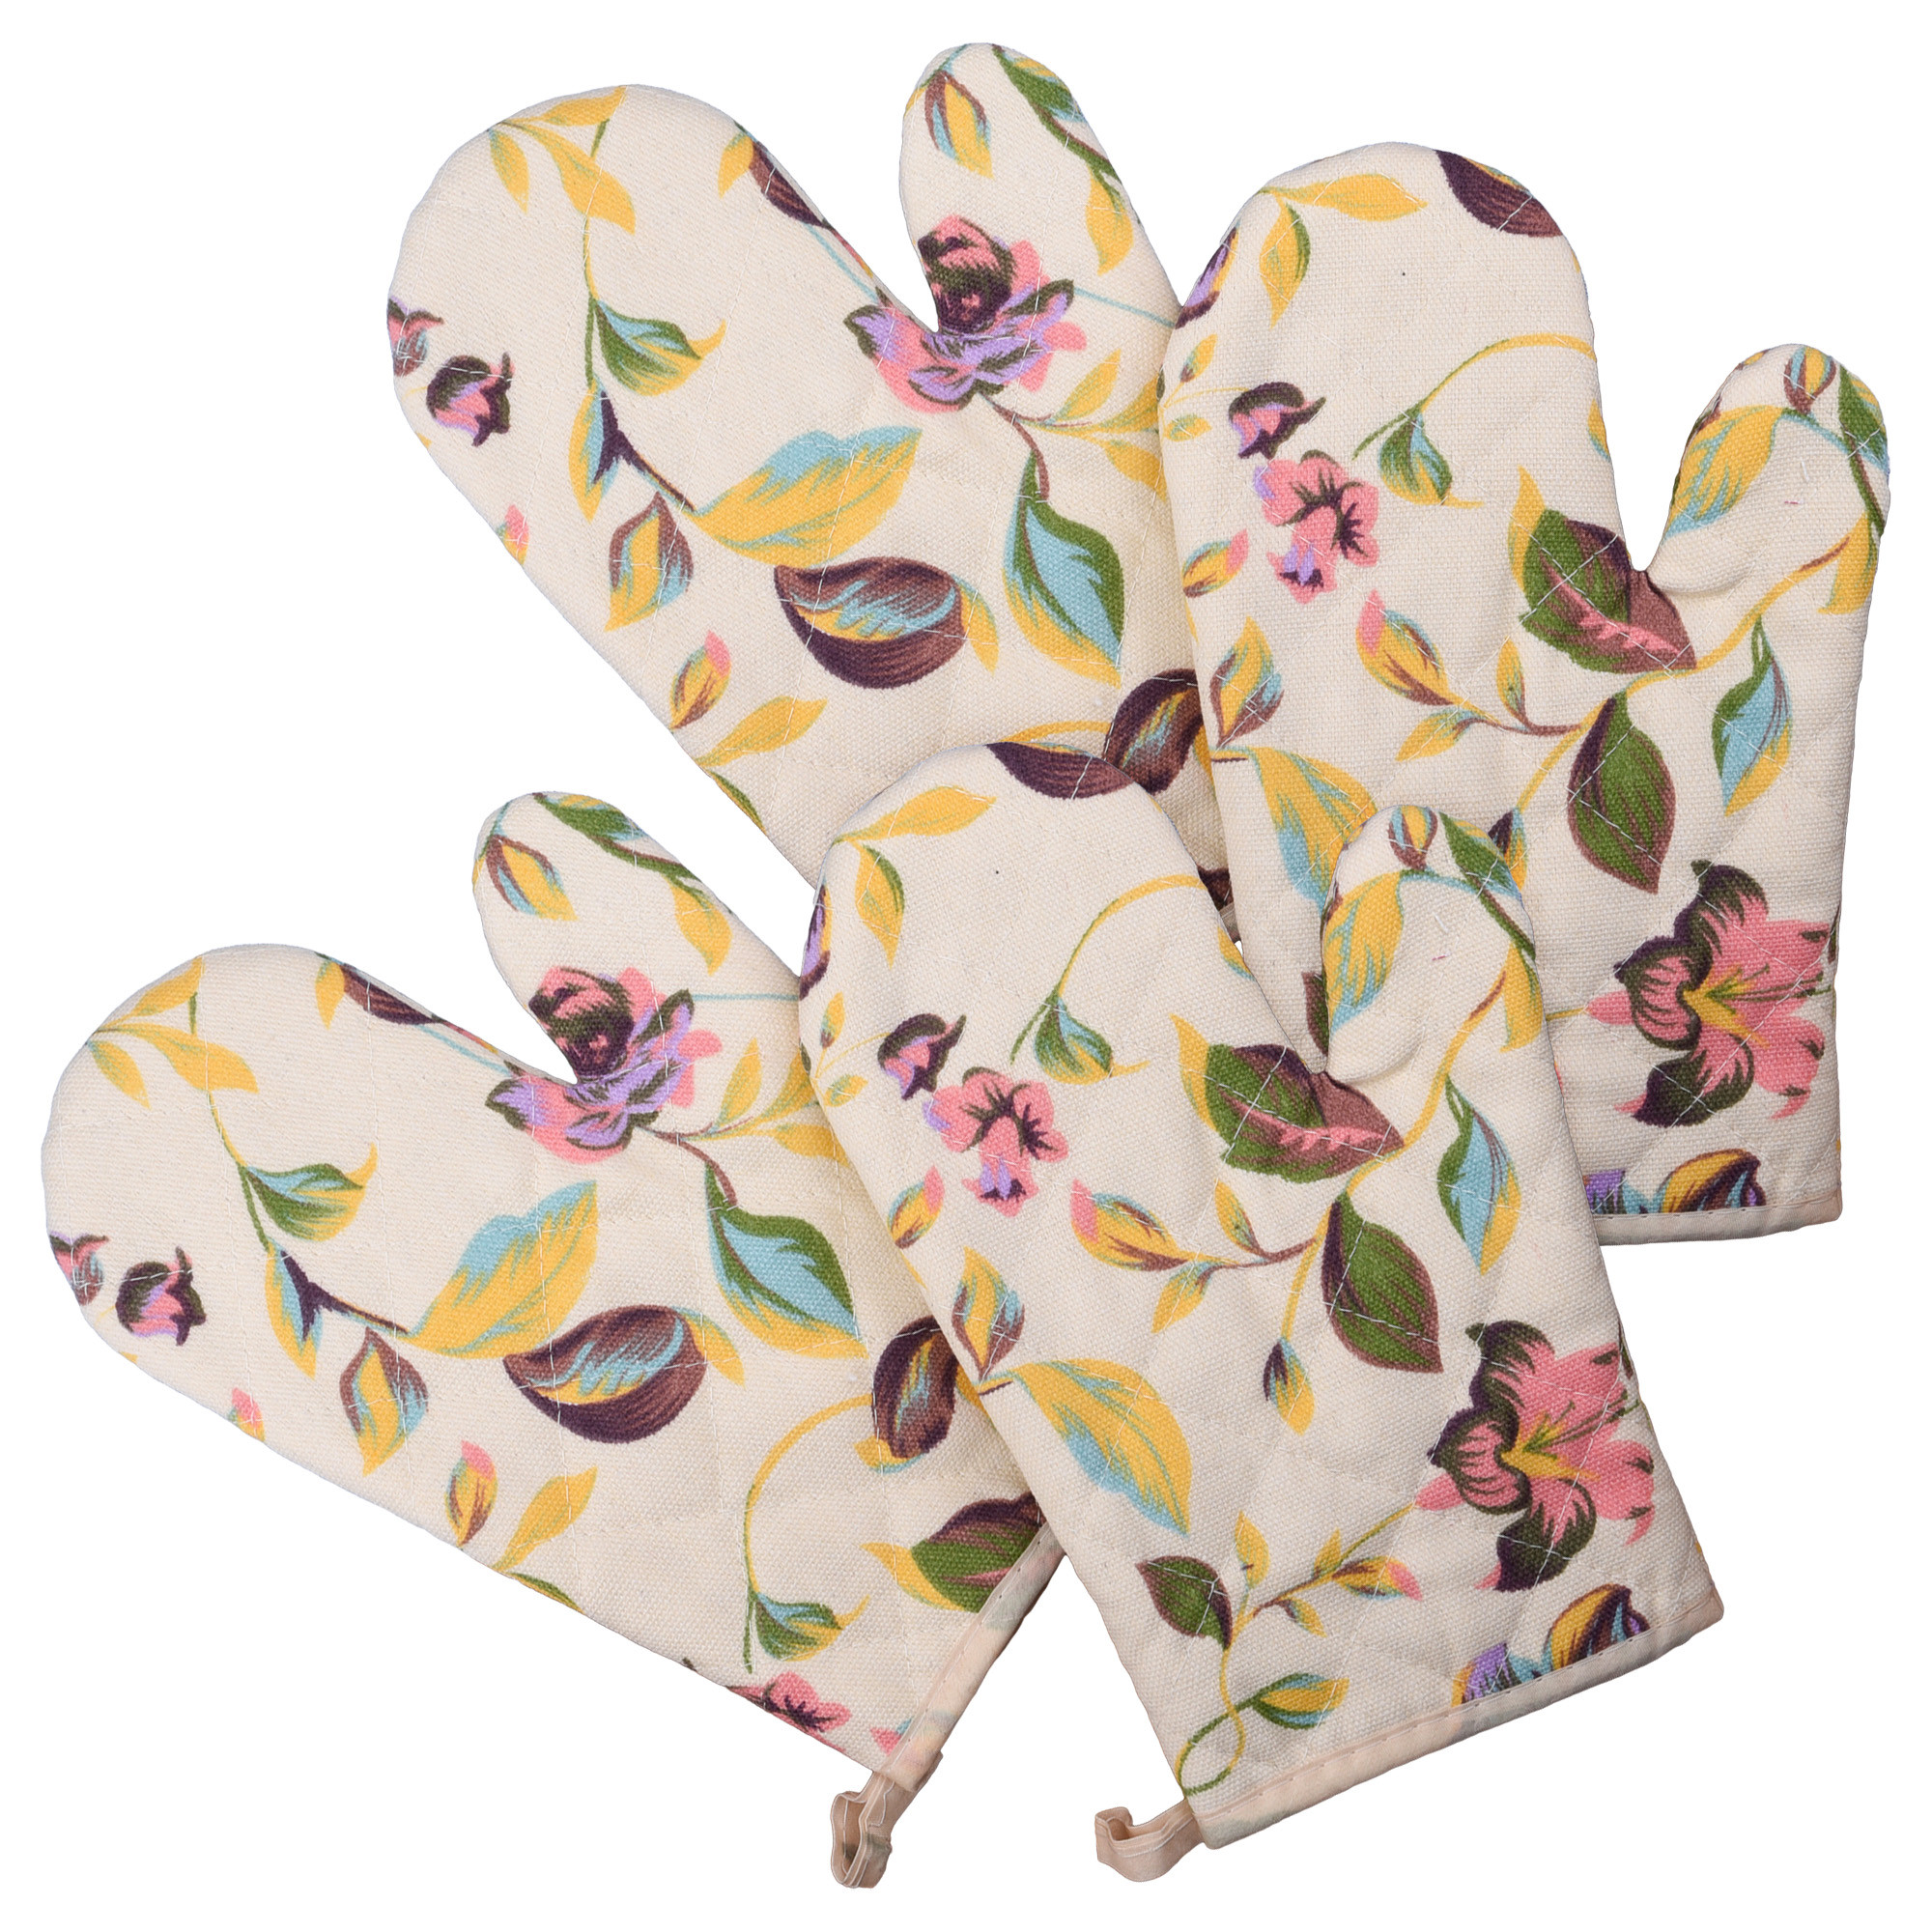 Kuber Industries Oven Mitts | Kitchen Gloves | Microwave Oven Gloves | Leaf Print Hanging Loop Oven Gloves | Insulated Gloves for Oven | Heat Resistant |Cream